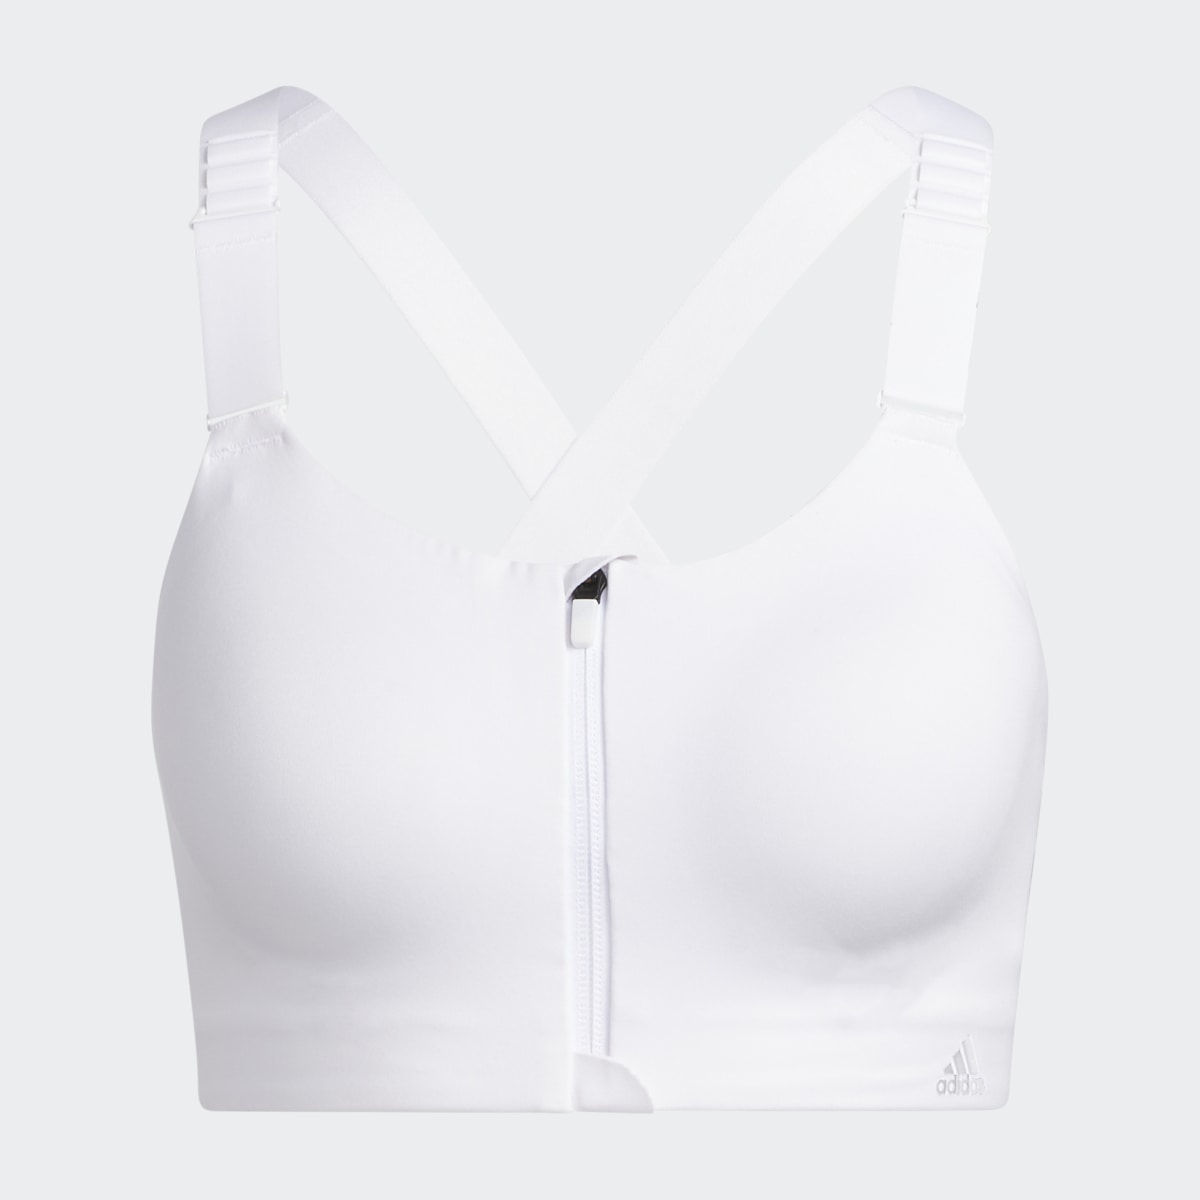 Adidas Brassière TLRD Impact Luxe Training Maintien fort Zip. 5